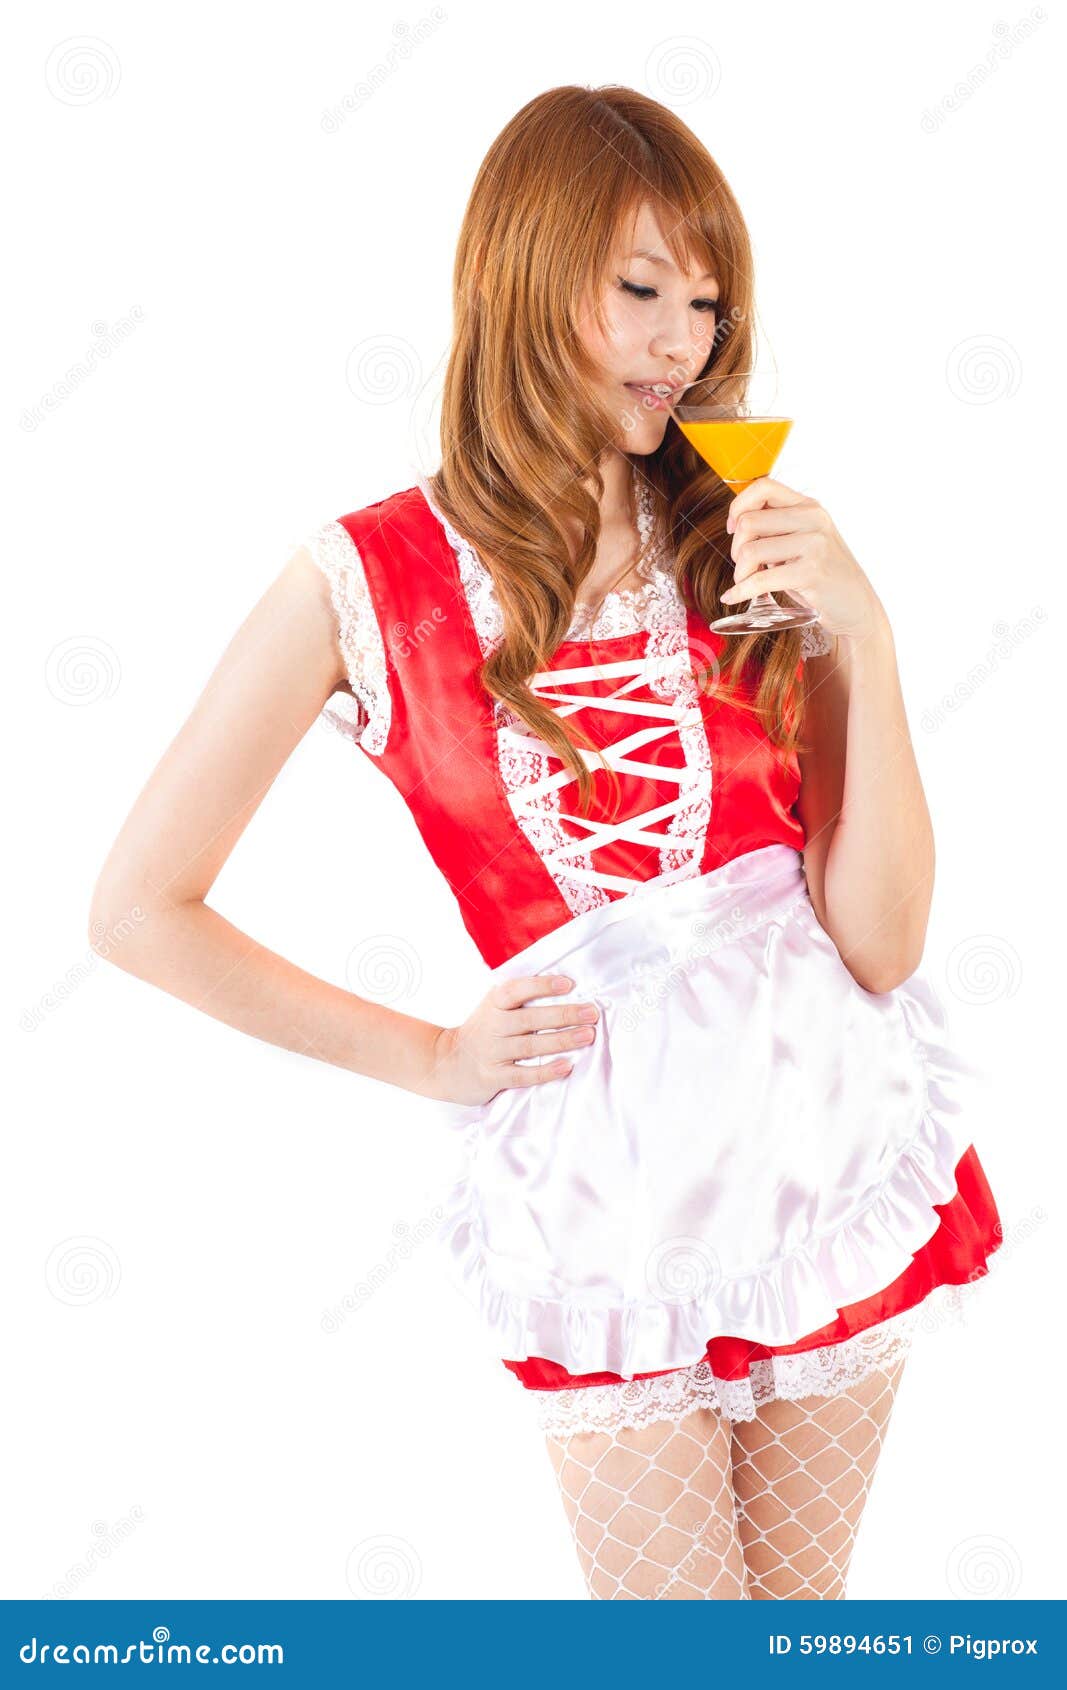 Cosplay of Maid Drink Orange Juice Glass on White Backgound. Stock ...